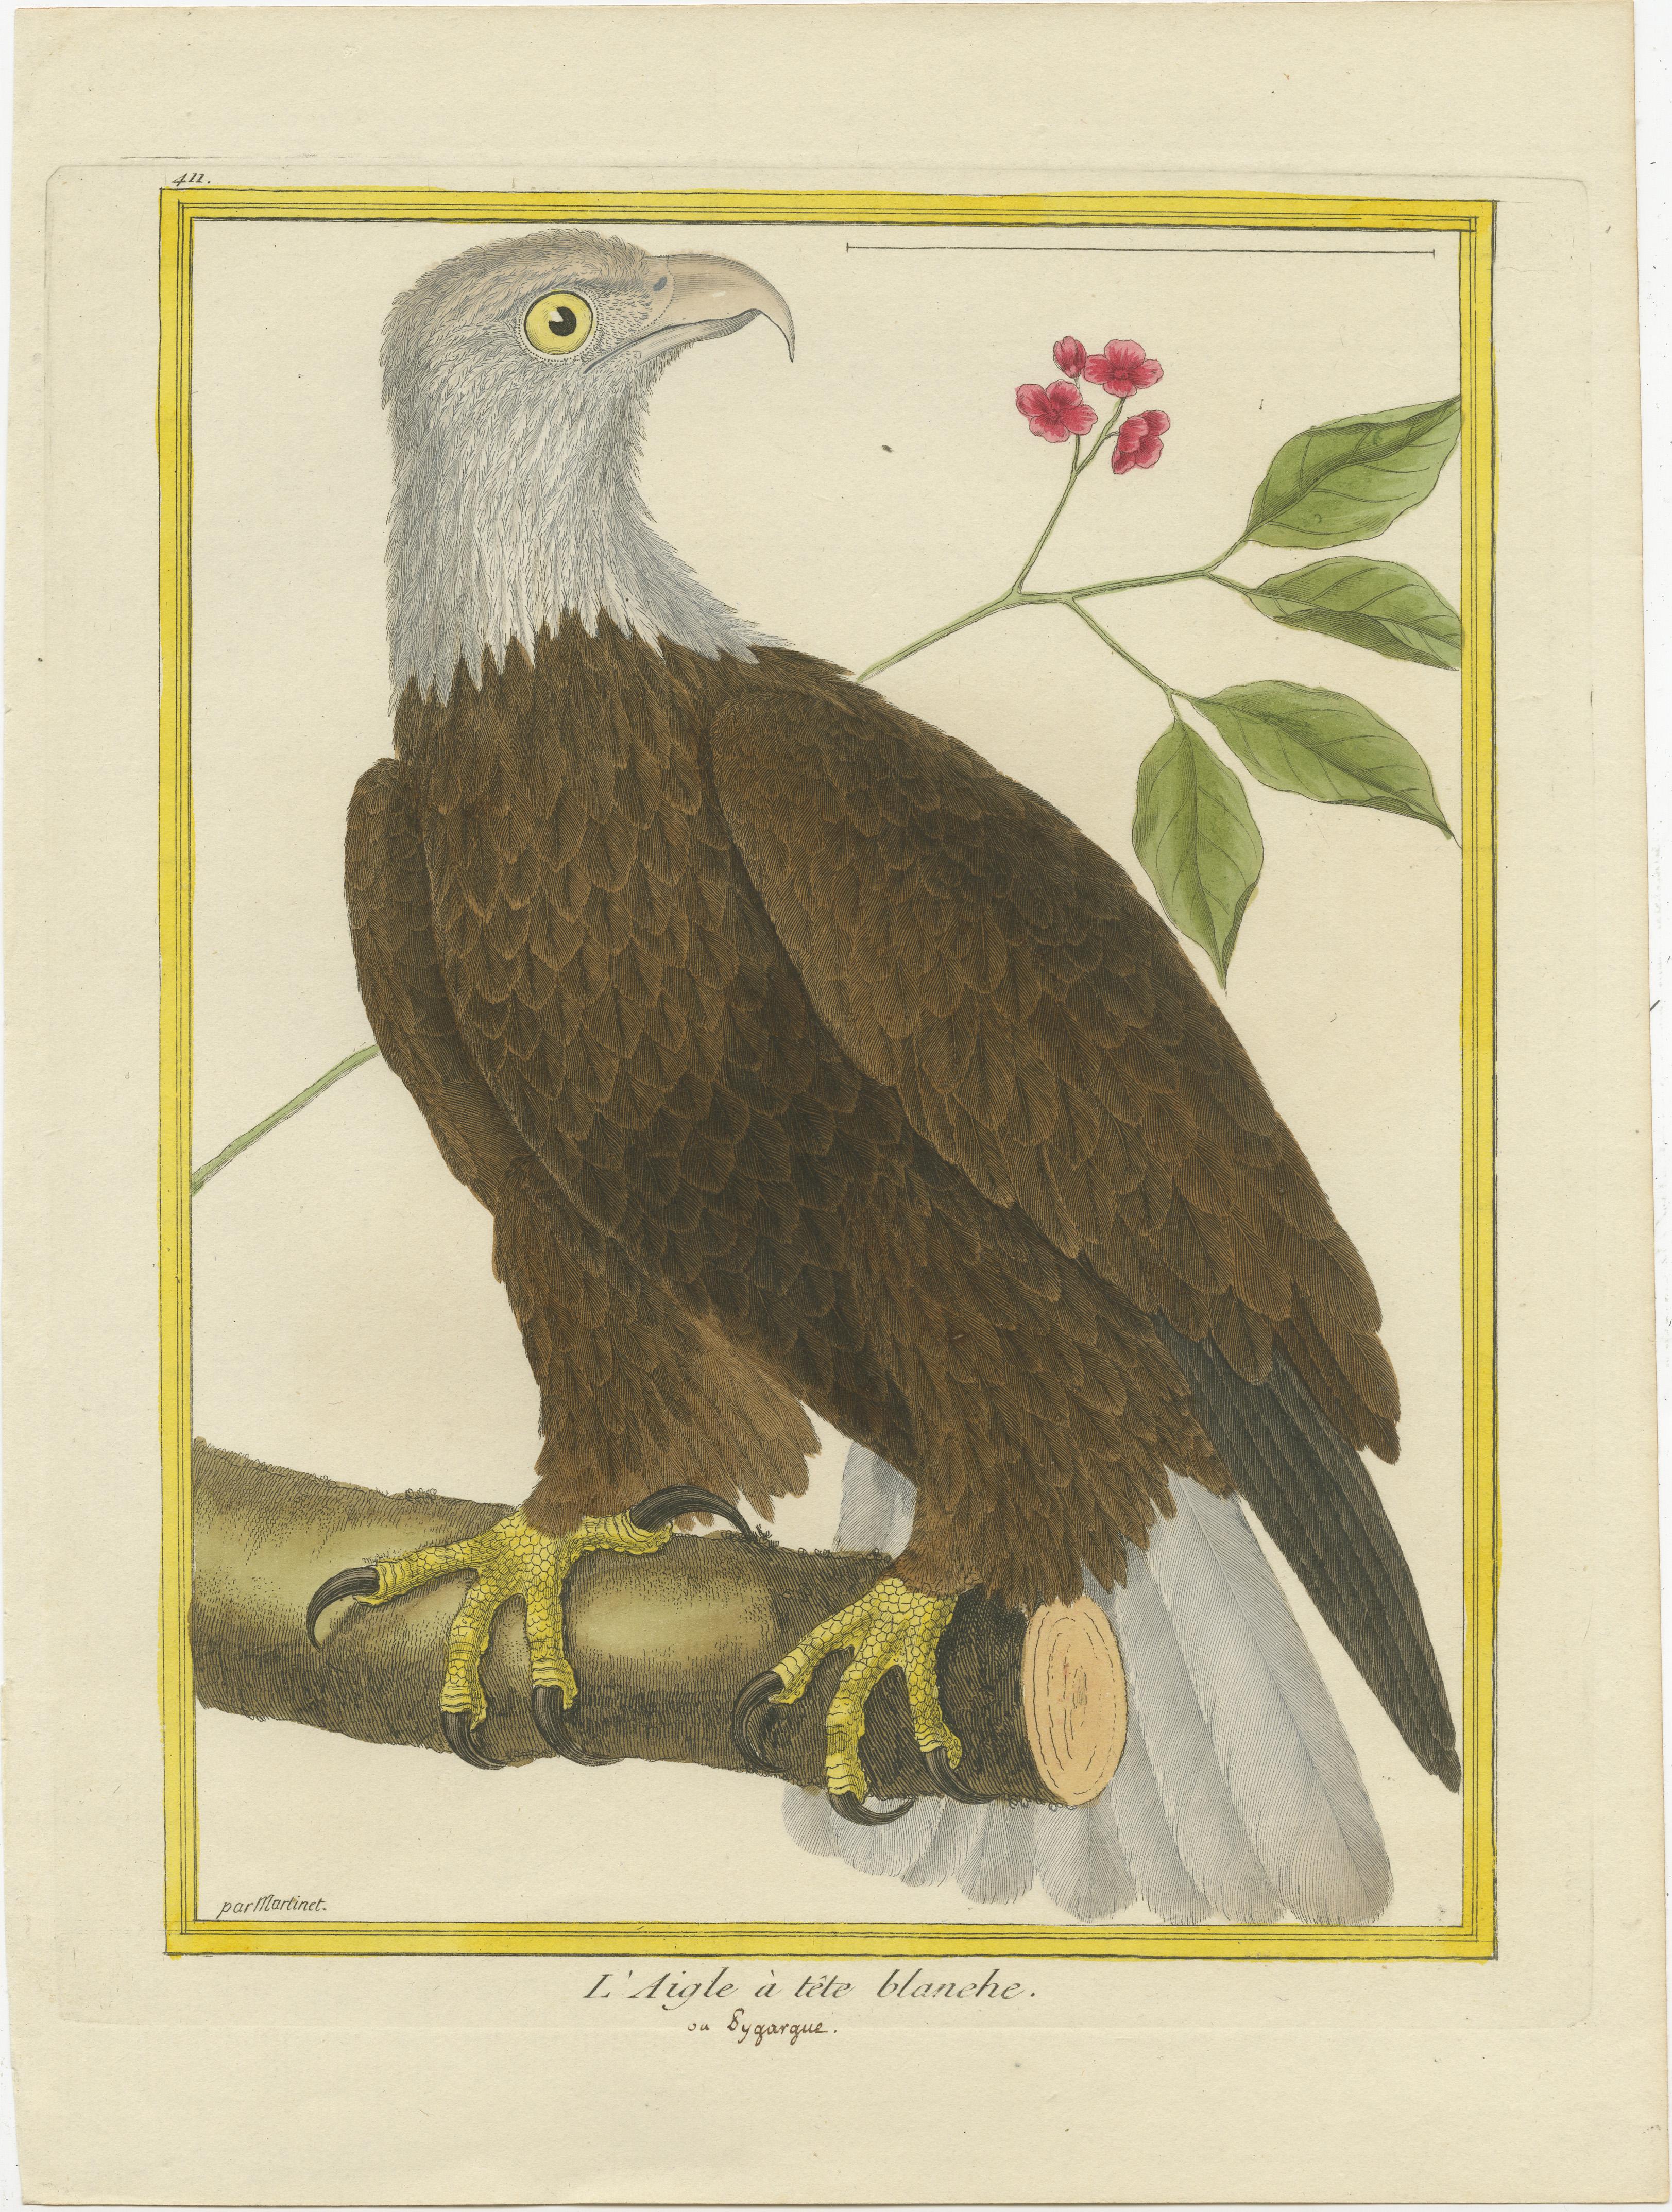 Antique print titled 'L'Aigle à tête blanche'. Hand colored engraving of a bald eagle, a bird of prey found in North America. 

This print originates from 'Histoire Naturelle des Oiseaux' by Francois Nicolas Martinet, one of France’s foremost bird